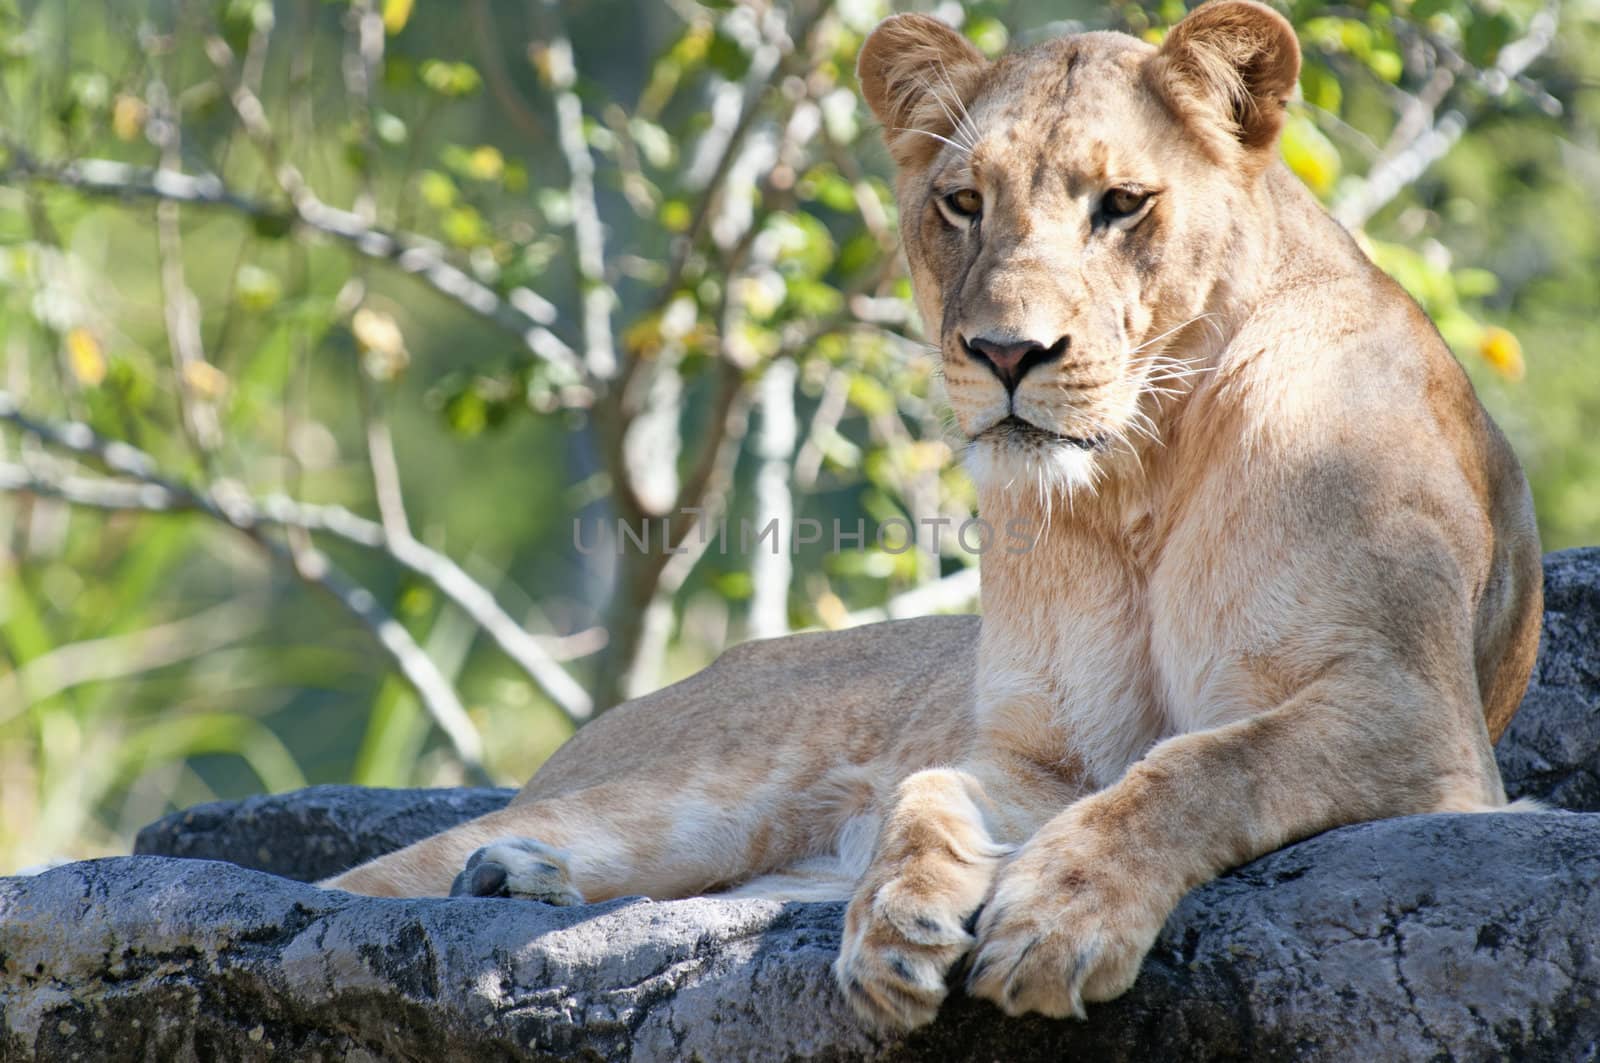 Female Lion resting on a rock.